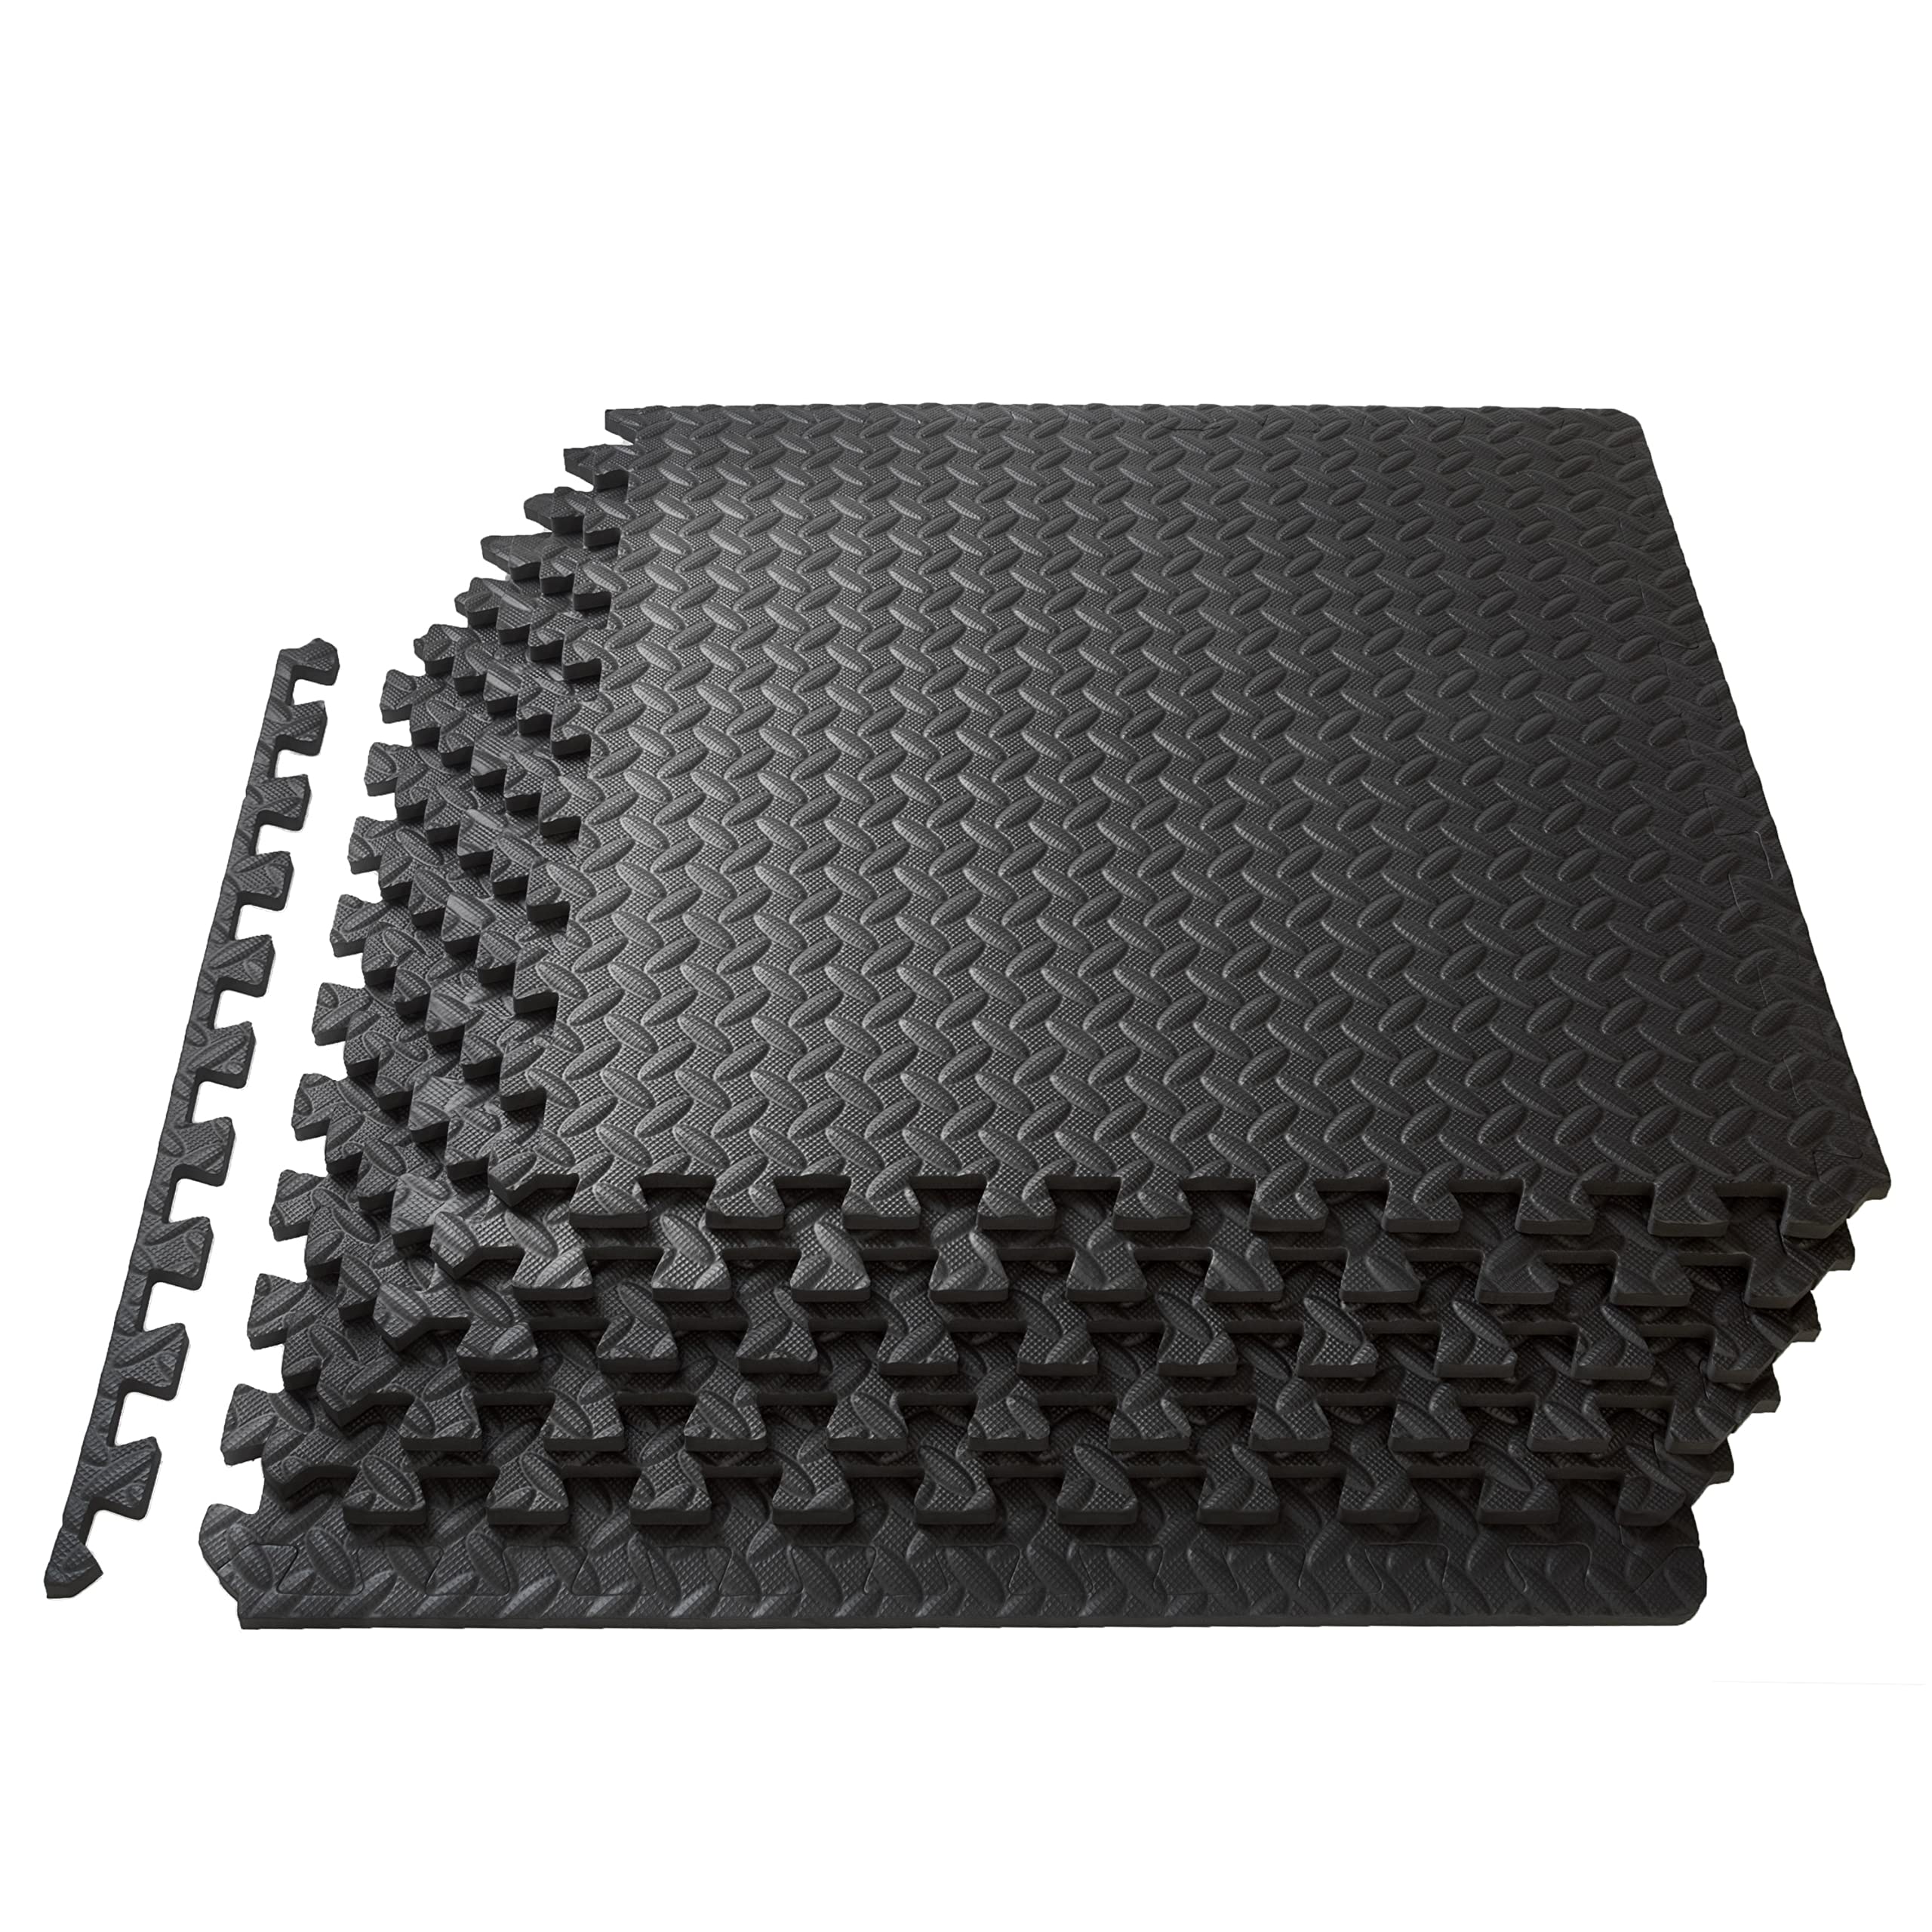 ProsourceFit Puzzle Exercise Mat , EVA Foam Interlocking Tiles Protective  Flooring for Gym Equipment and Cushion for Workouts Black 1/2 Thick 24  Square Feet